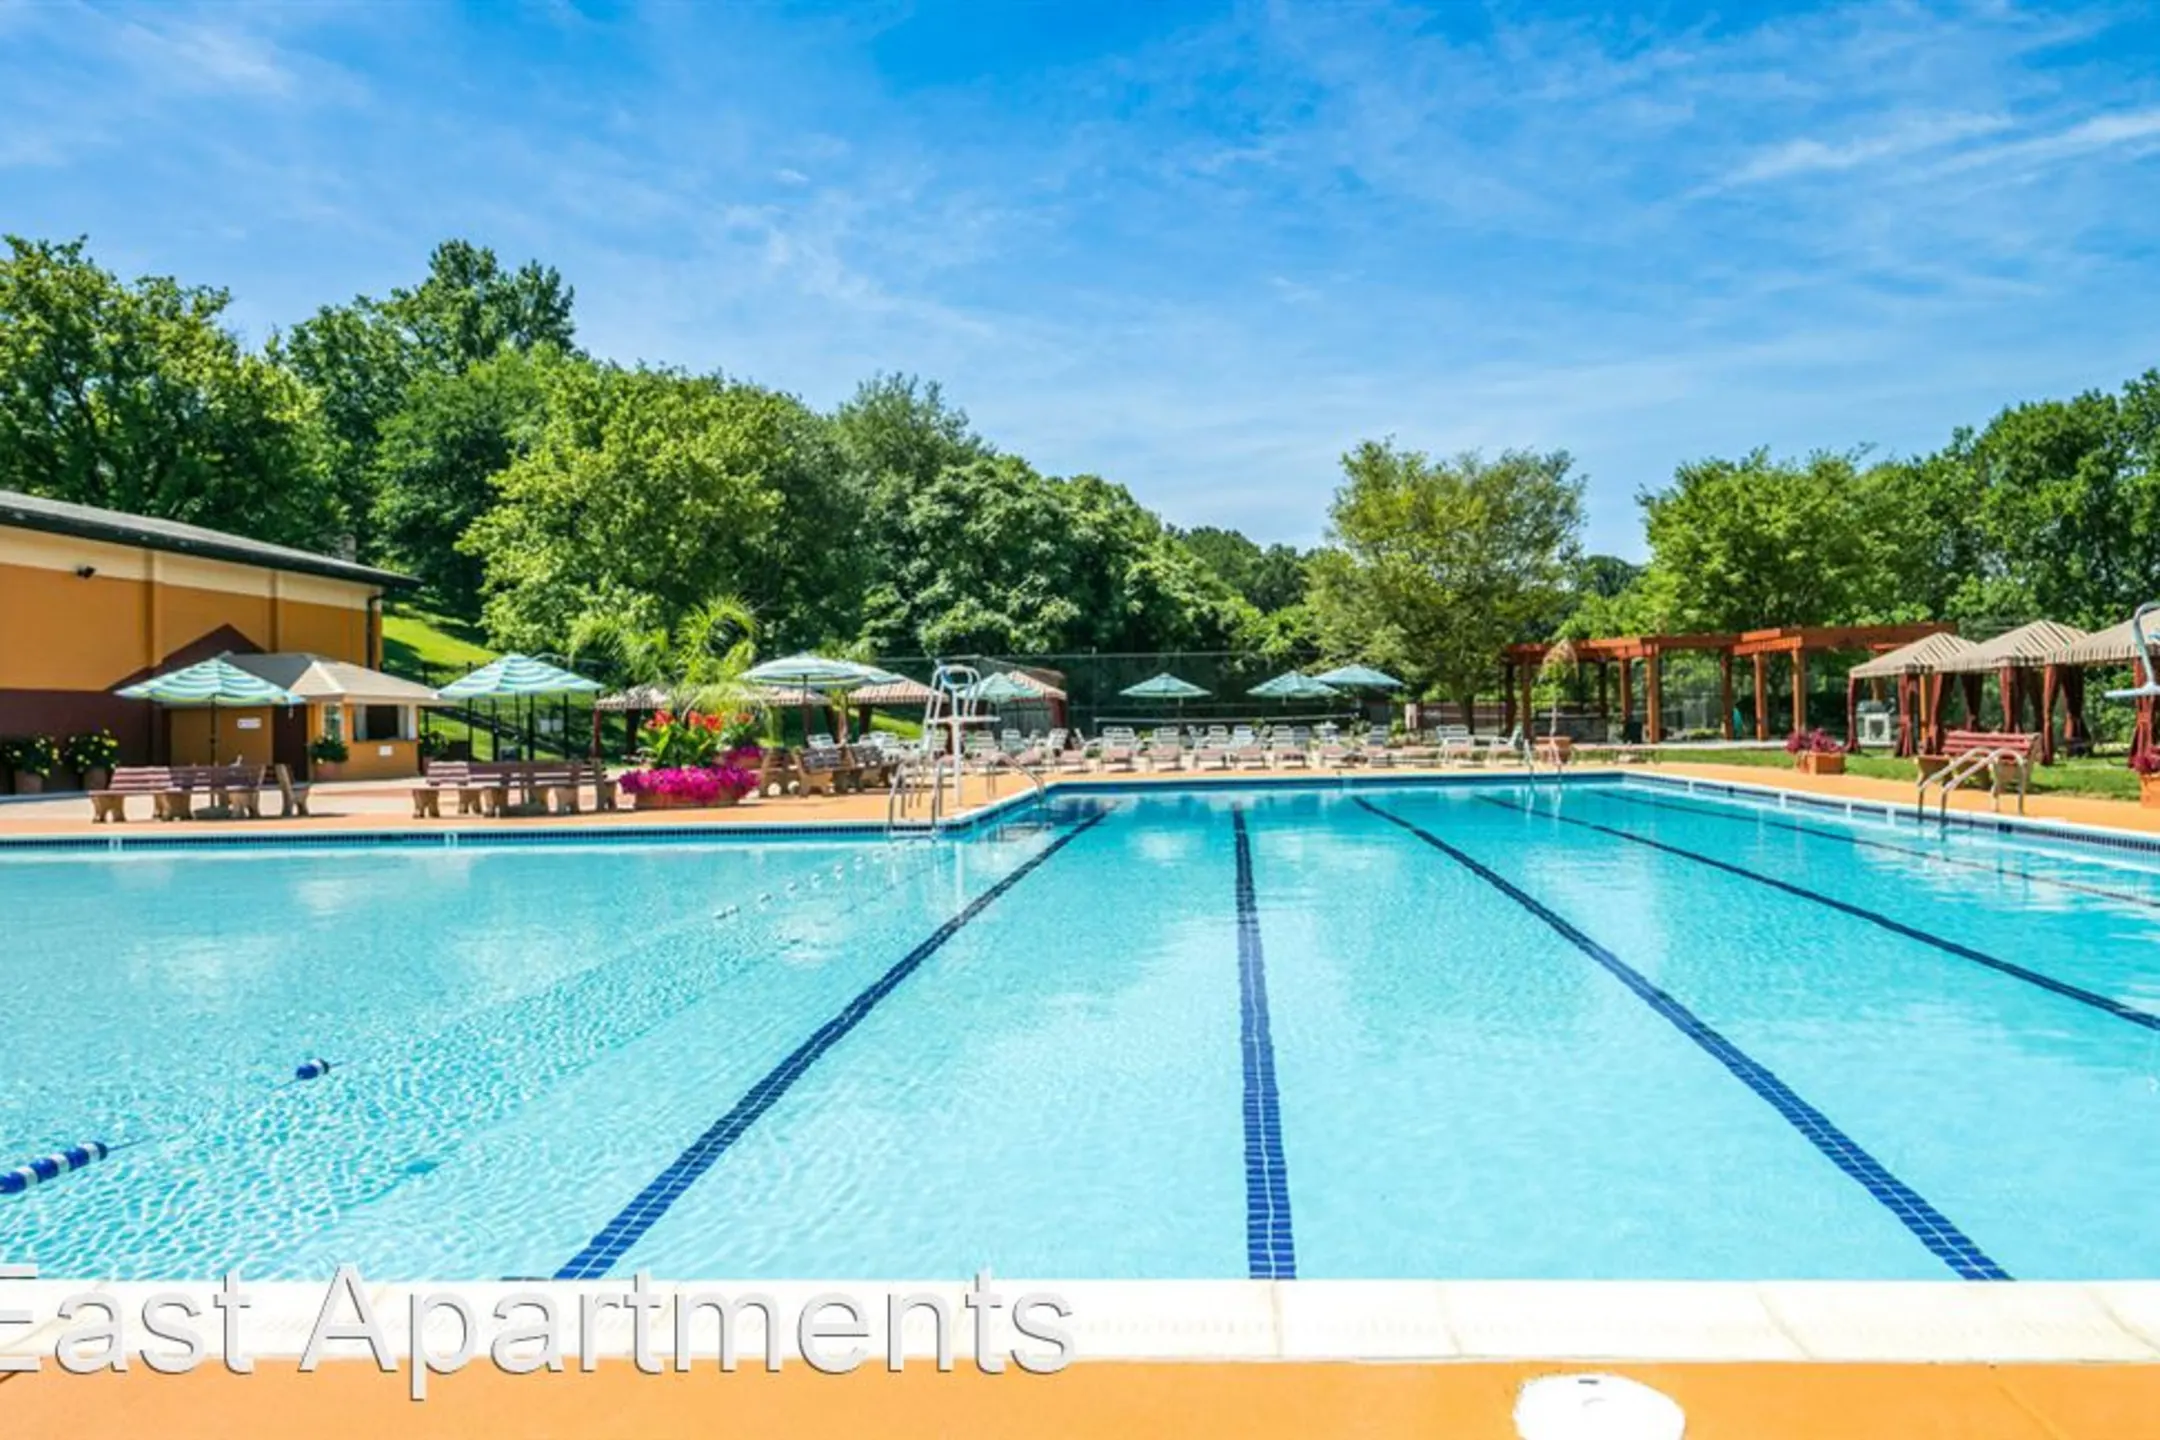 Pool - Briarcliff Apartments - Cockeysville, MD